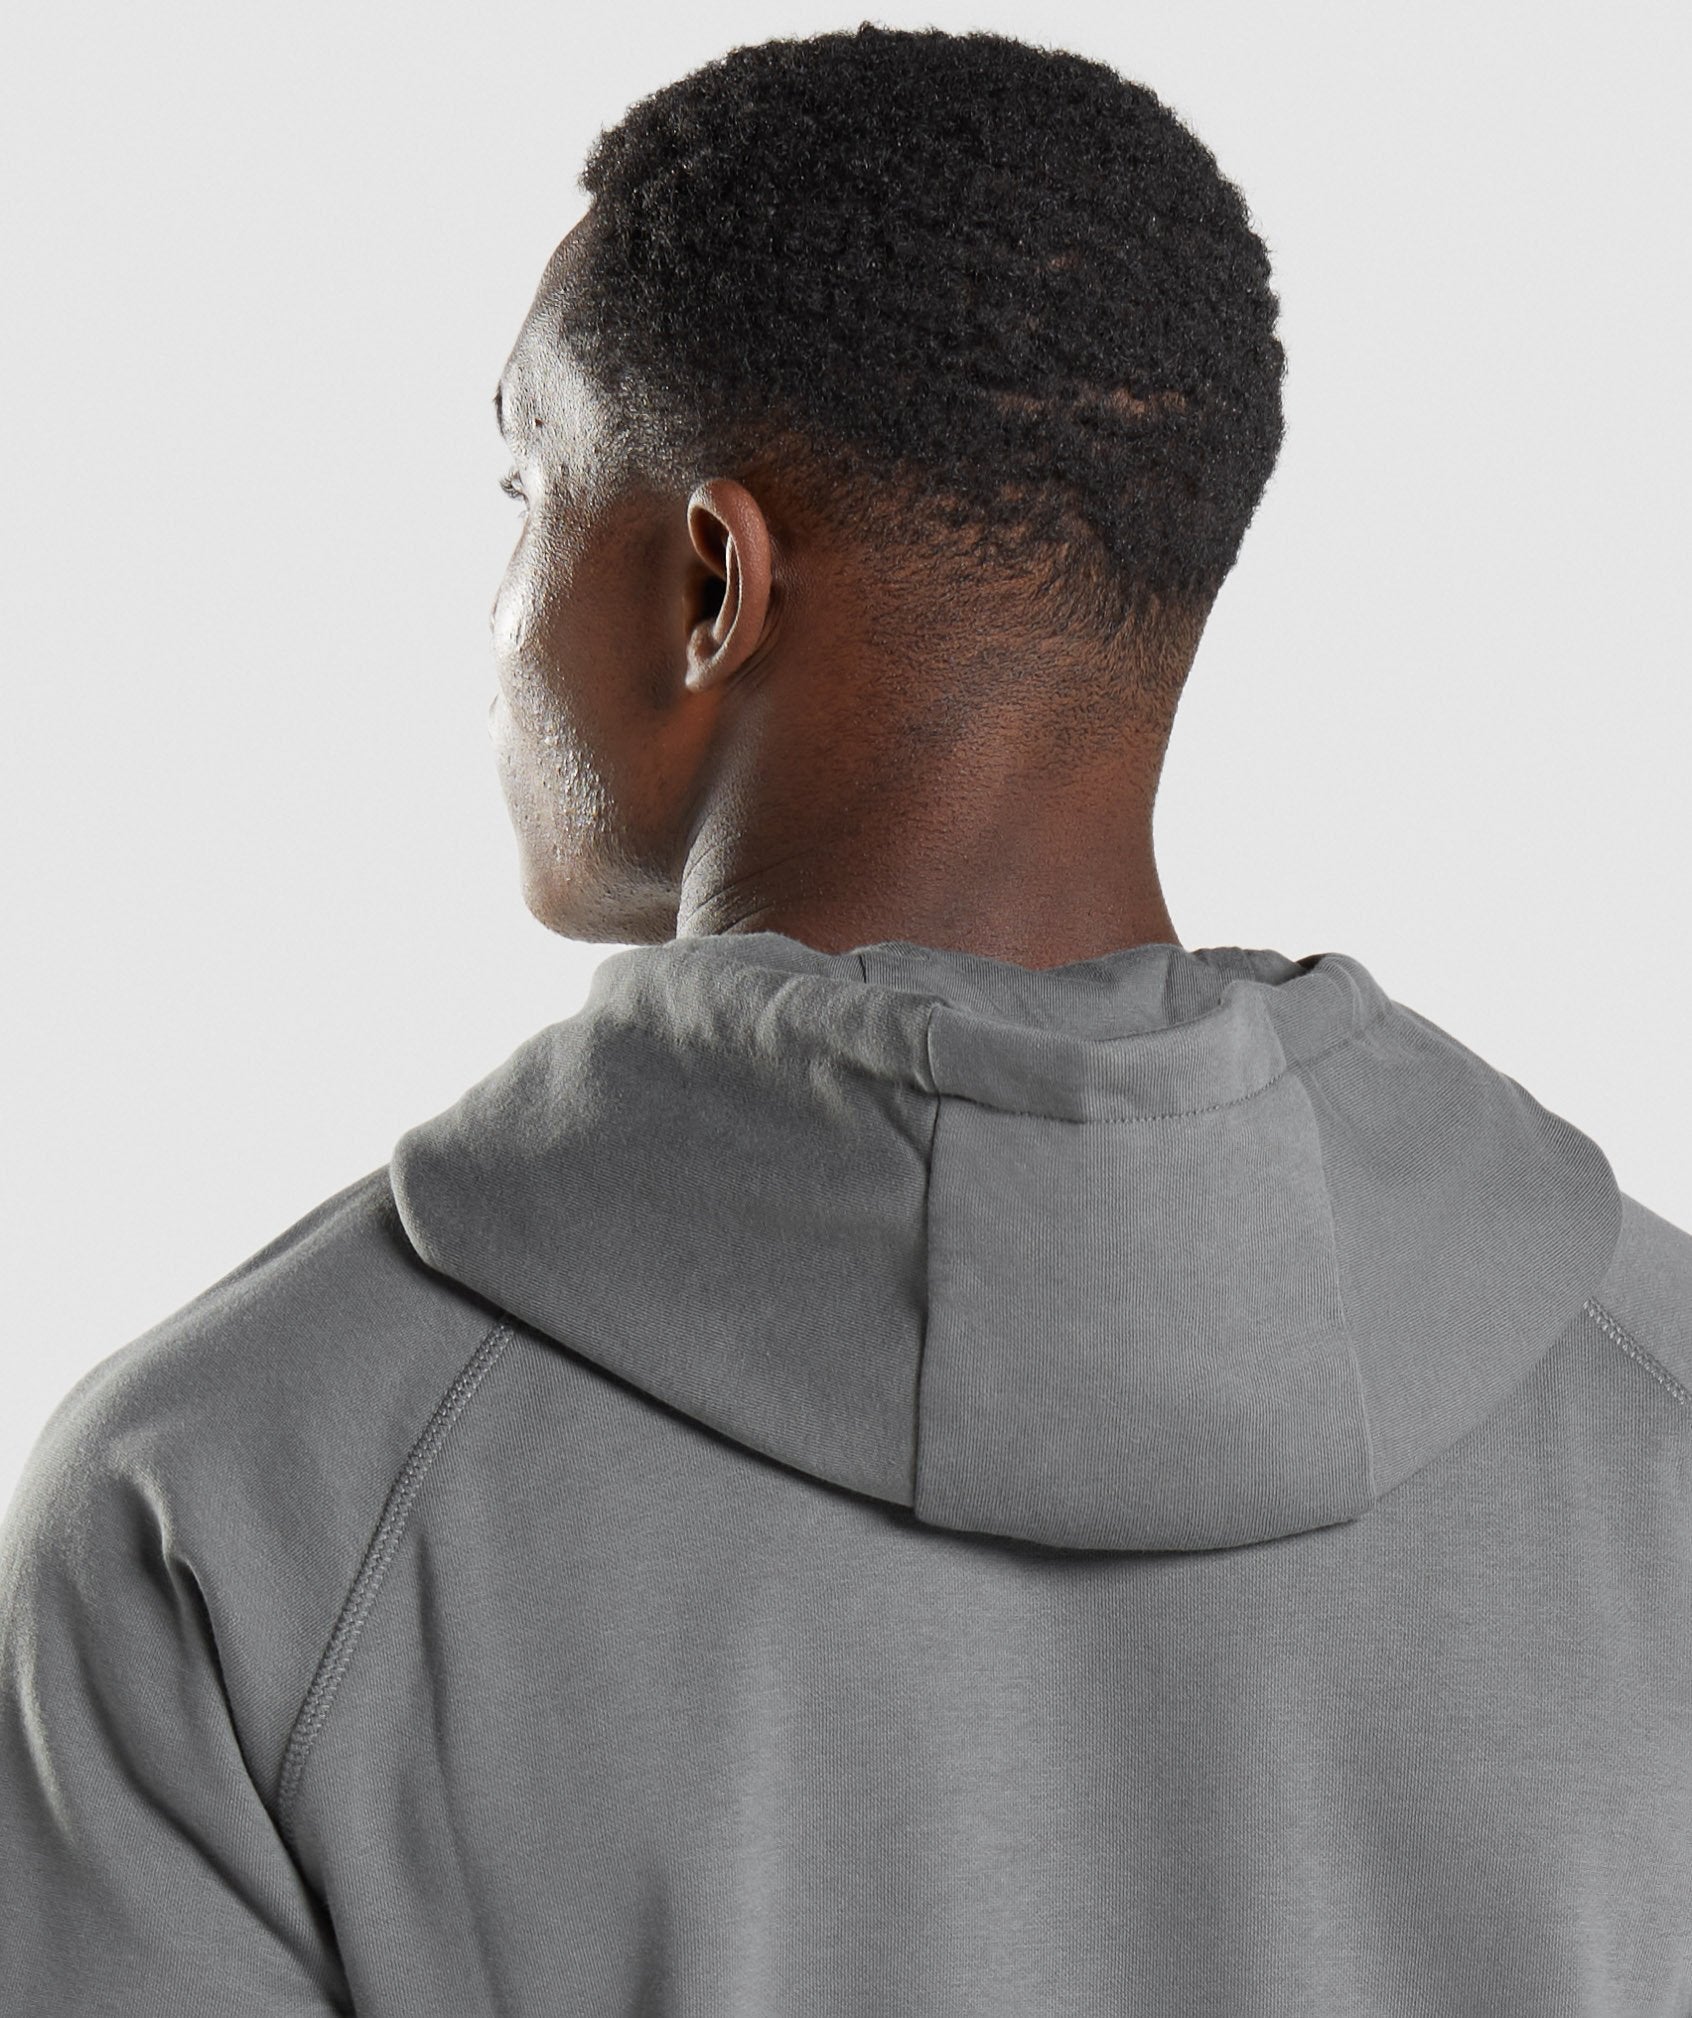 Sharkhead Infill Hoodie in Charcoal - view 5